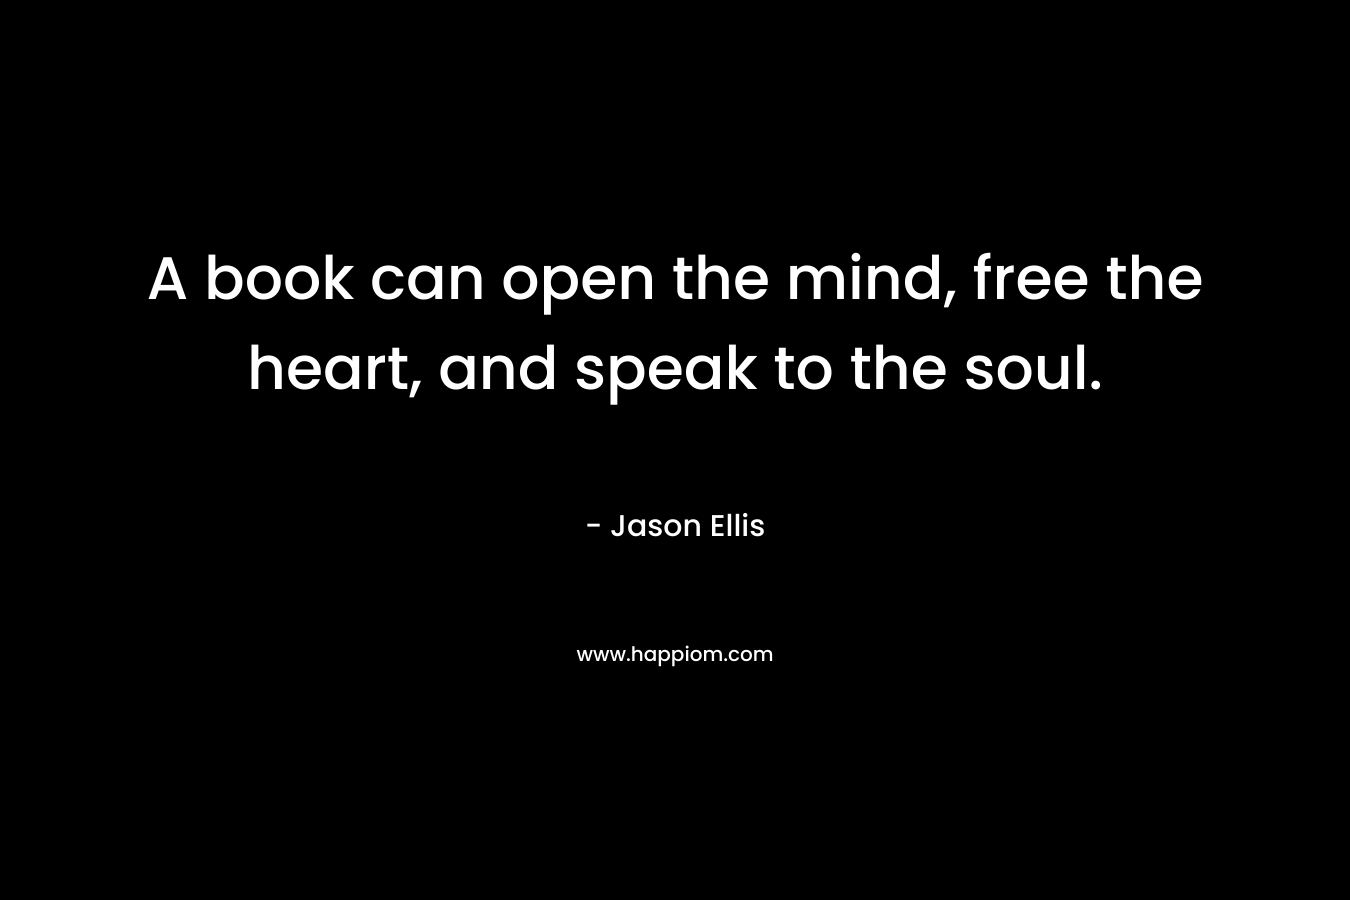 A book can open the mind, free the heart, and speak to the soul. – Jason Ellis